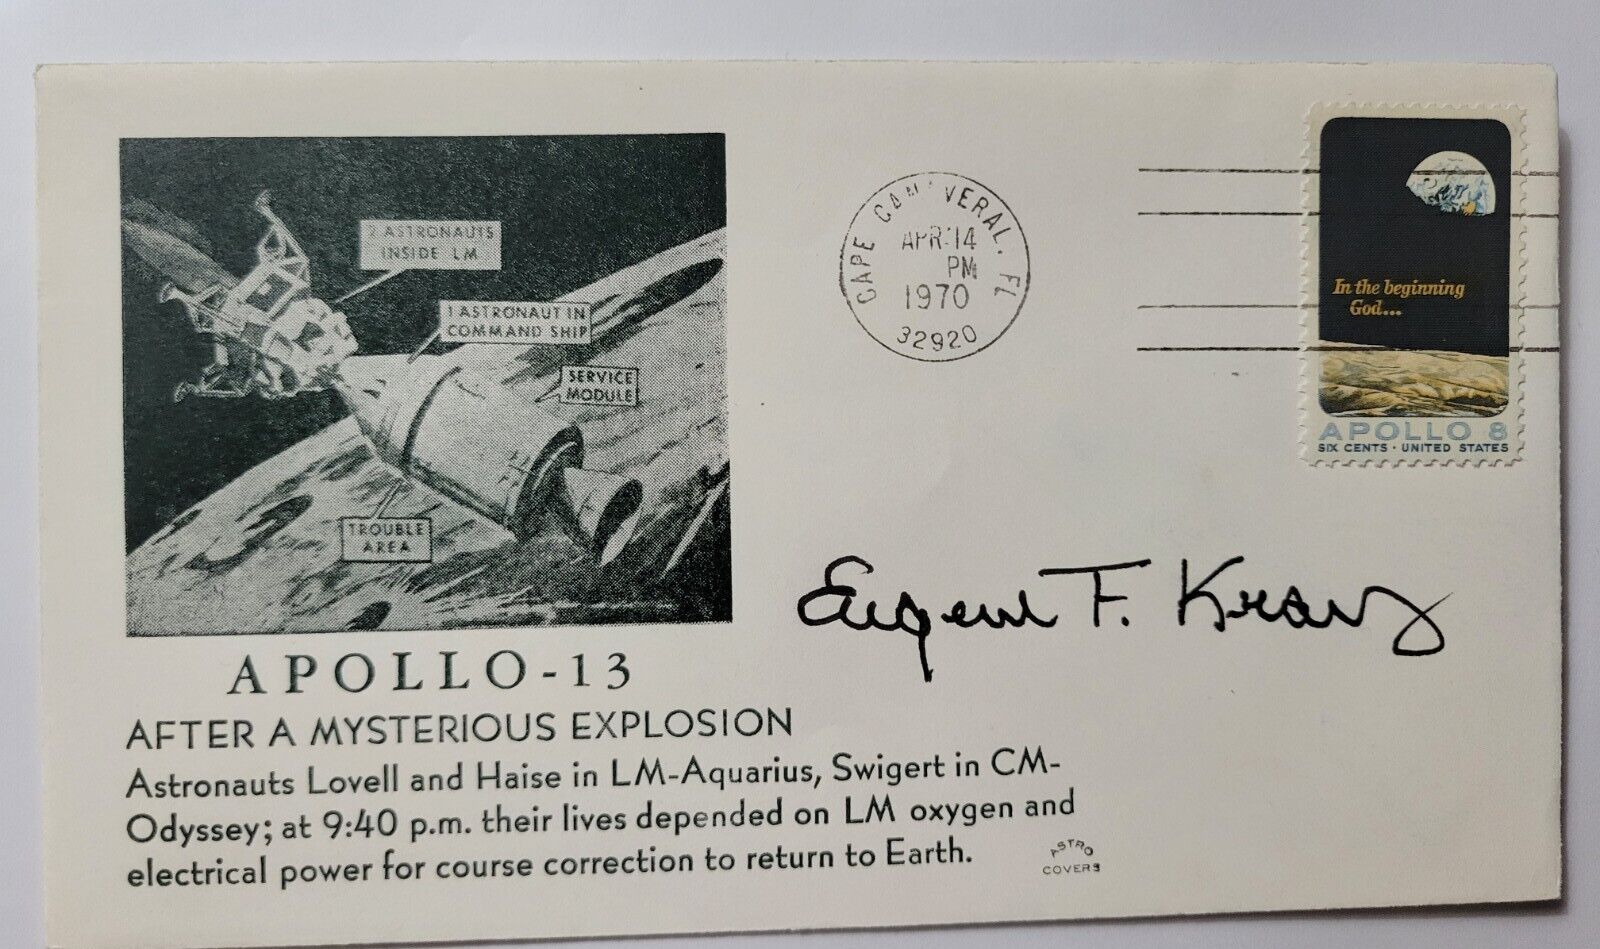 Eugene Kranz SIGNED Apollo 13 Postal Cover AFTER A MYSTERIOUS EXPLOSION 4/14/70